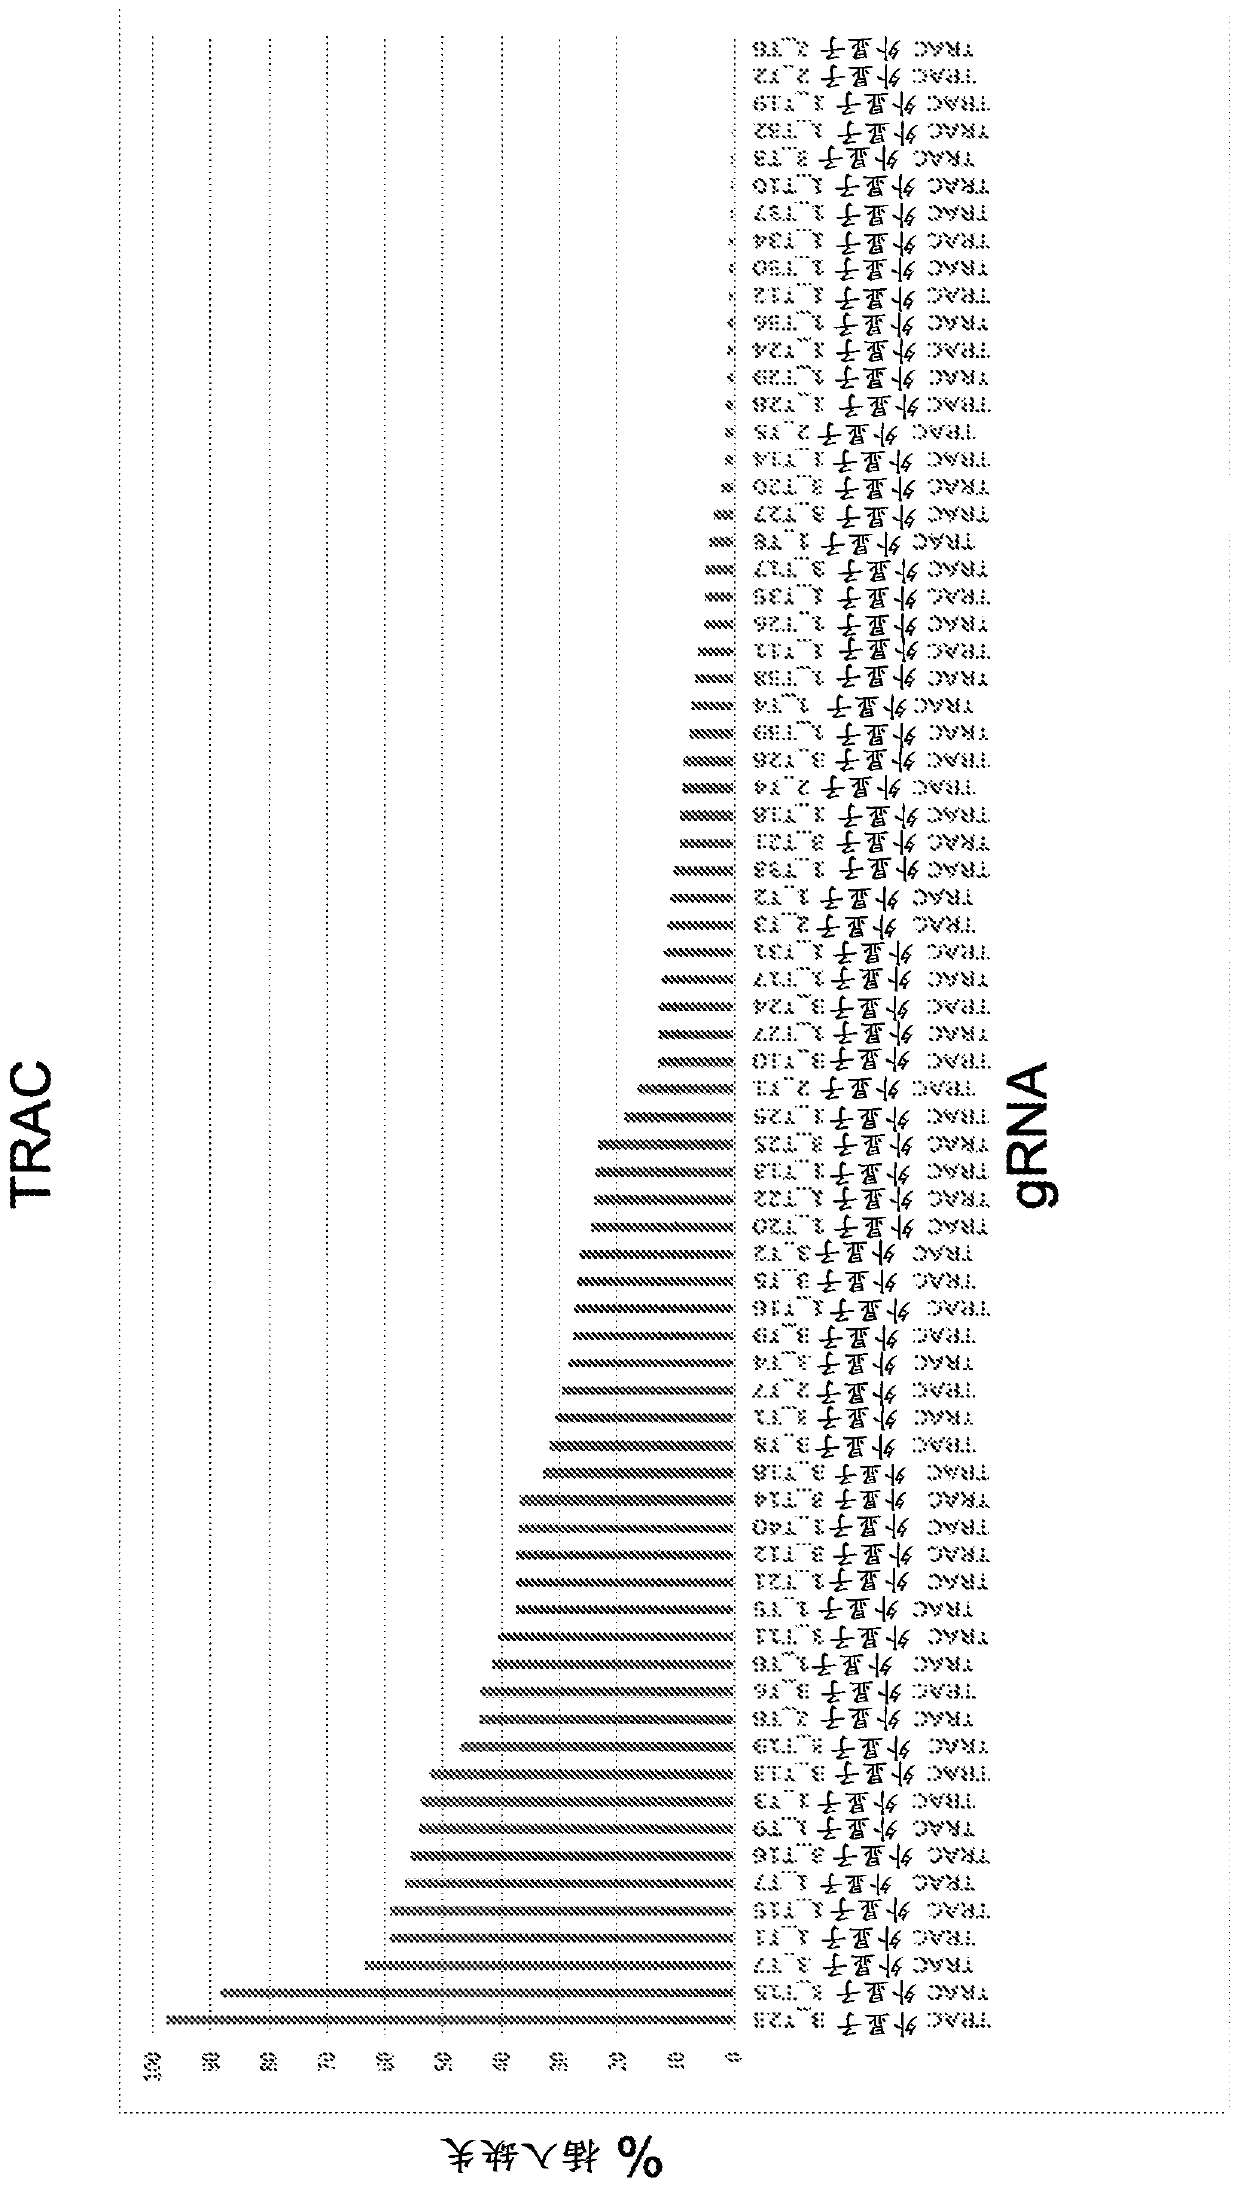 Materials and methods for engineering cells and uses thereof in immuno-oncology